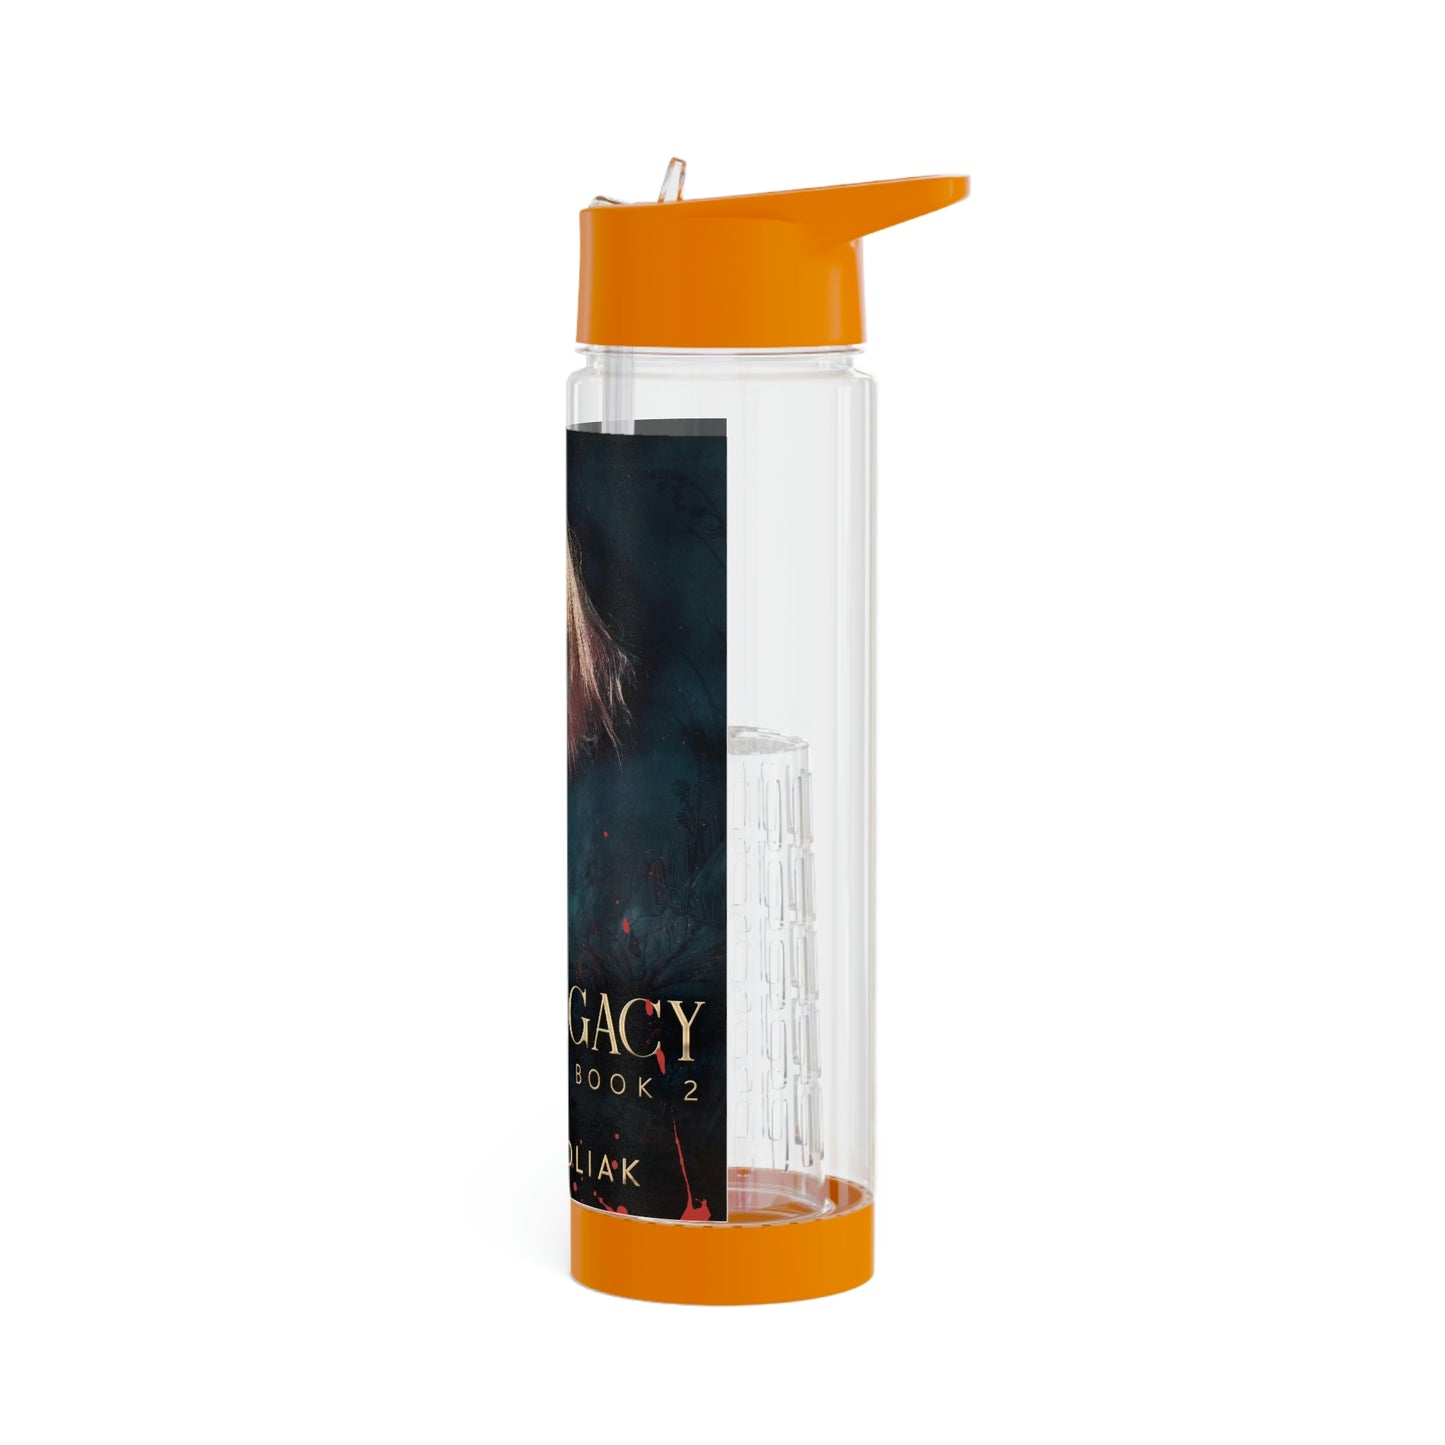 The Legacy - Infuser Water Bottle